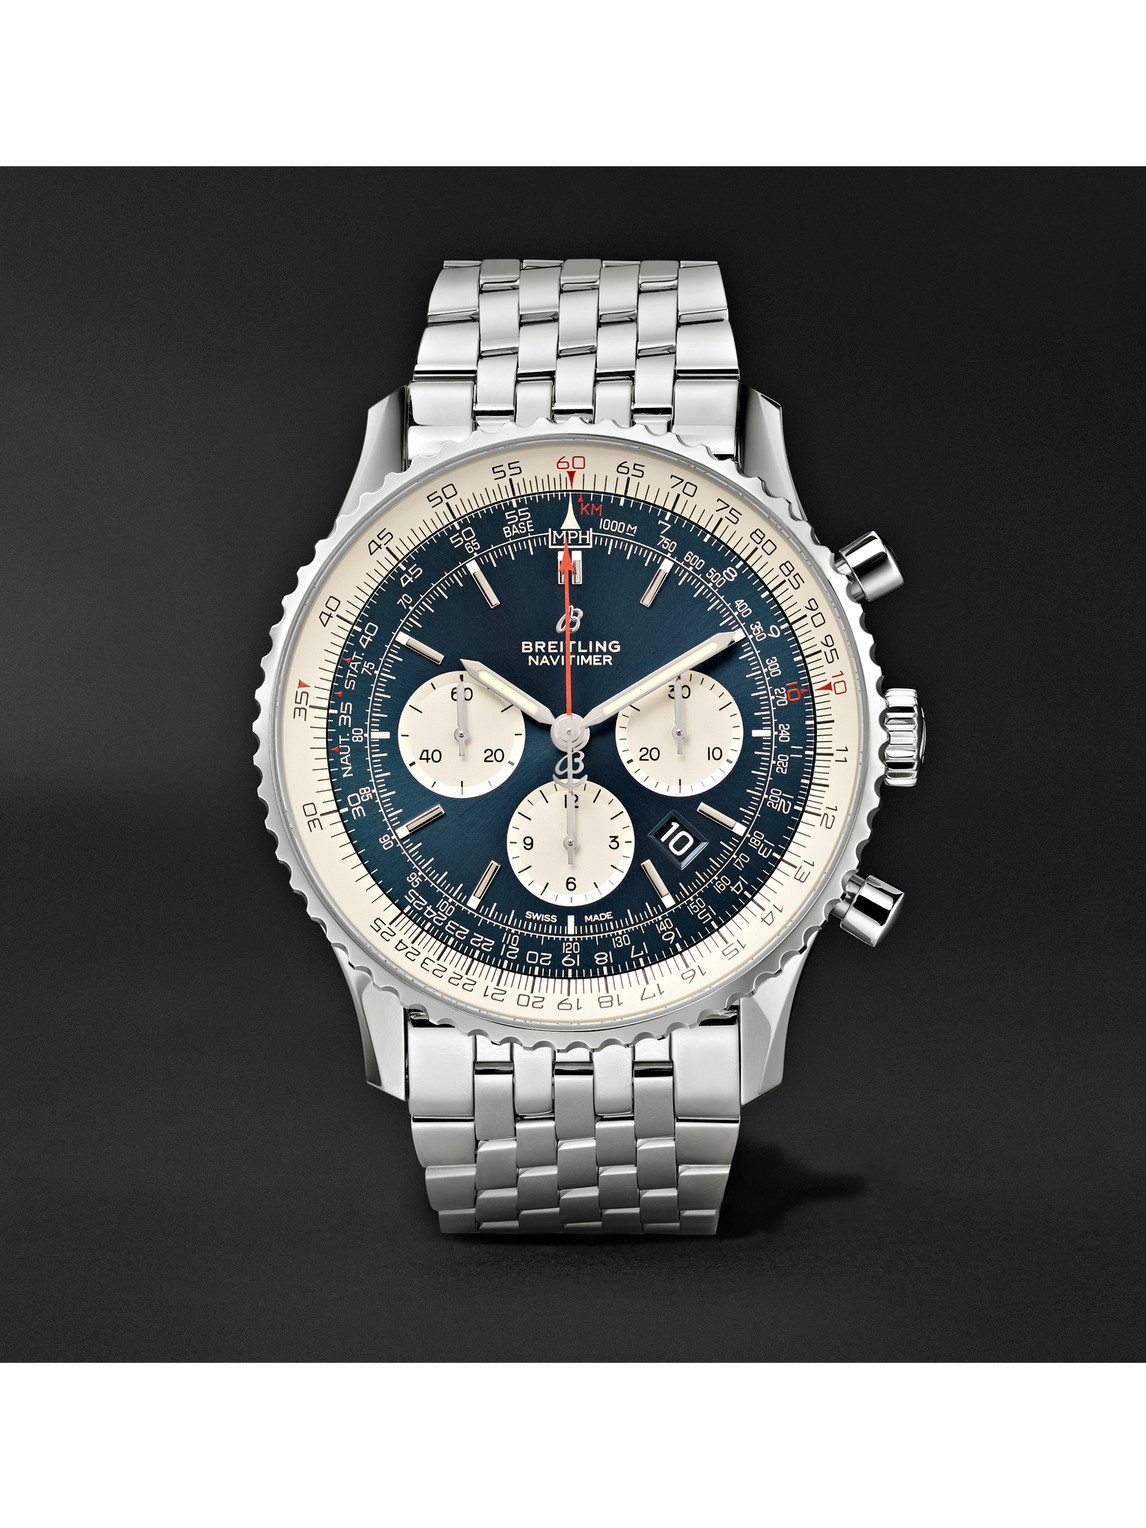 Navitimer B01 Automatic Chronograph 46mm Stainless Steel Watch, Ref. No. AB0127211C1A1